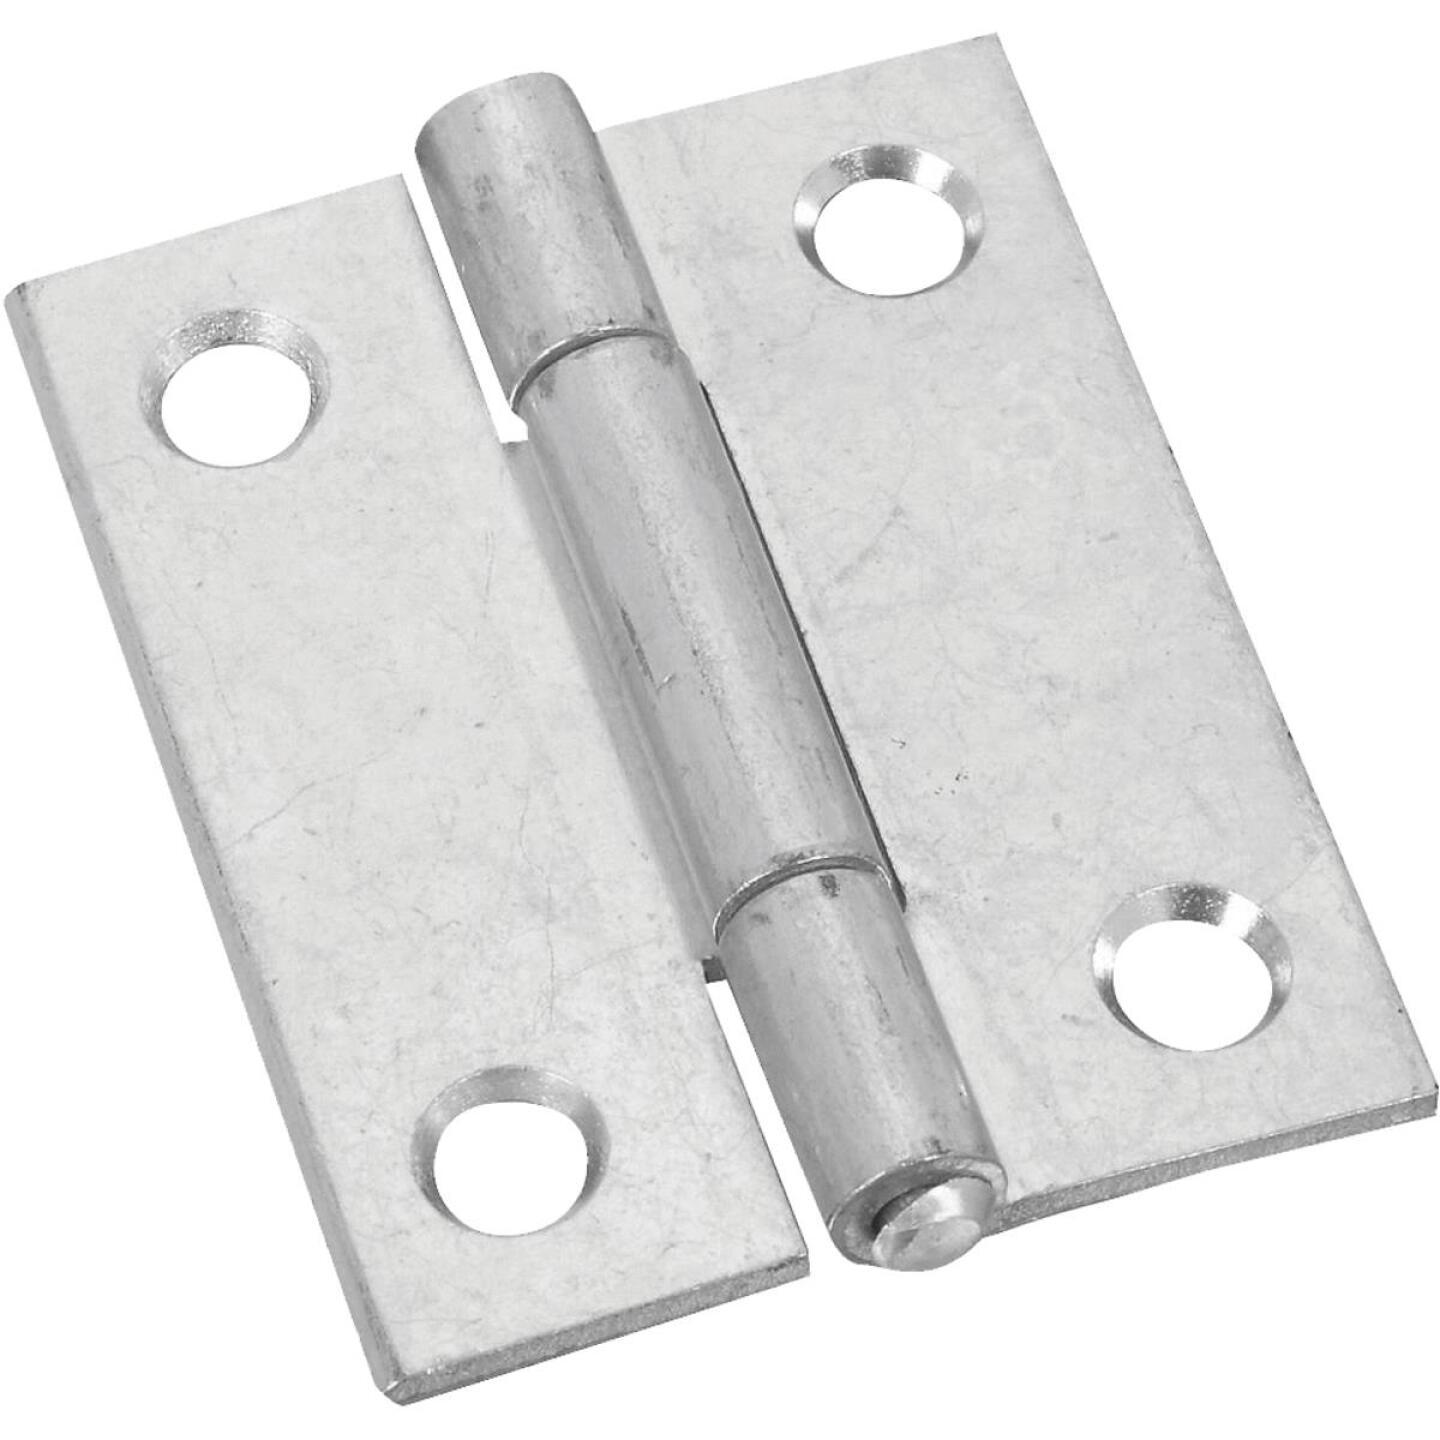 National, National 2 In. Zink Tight-Pin Narrow Scharnier (2-Pack)